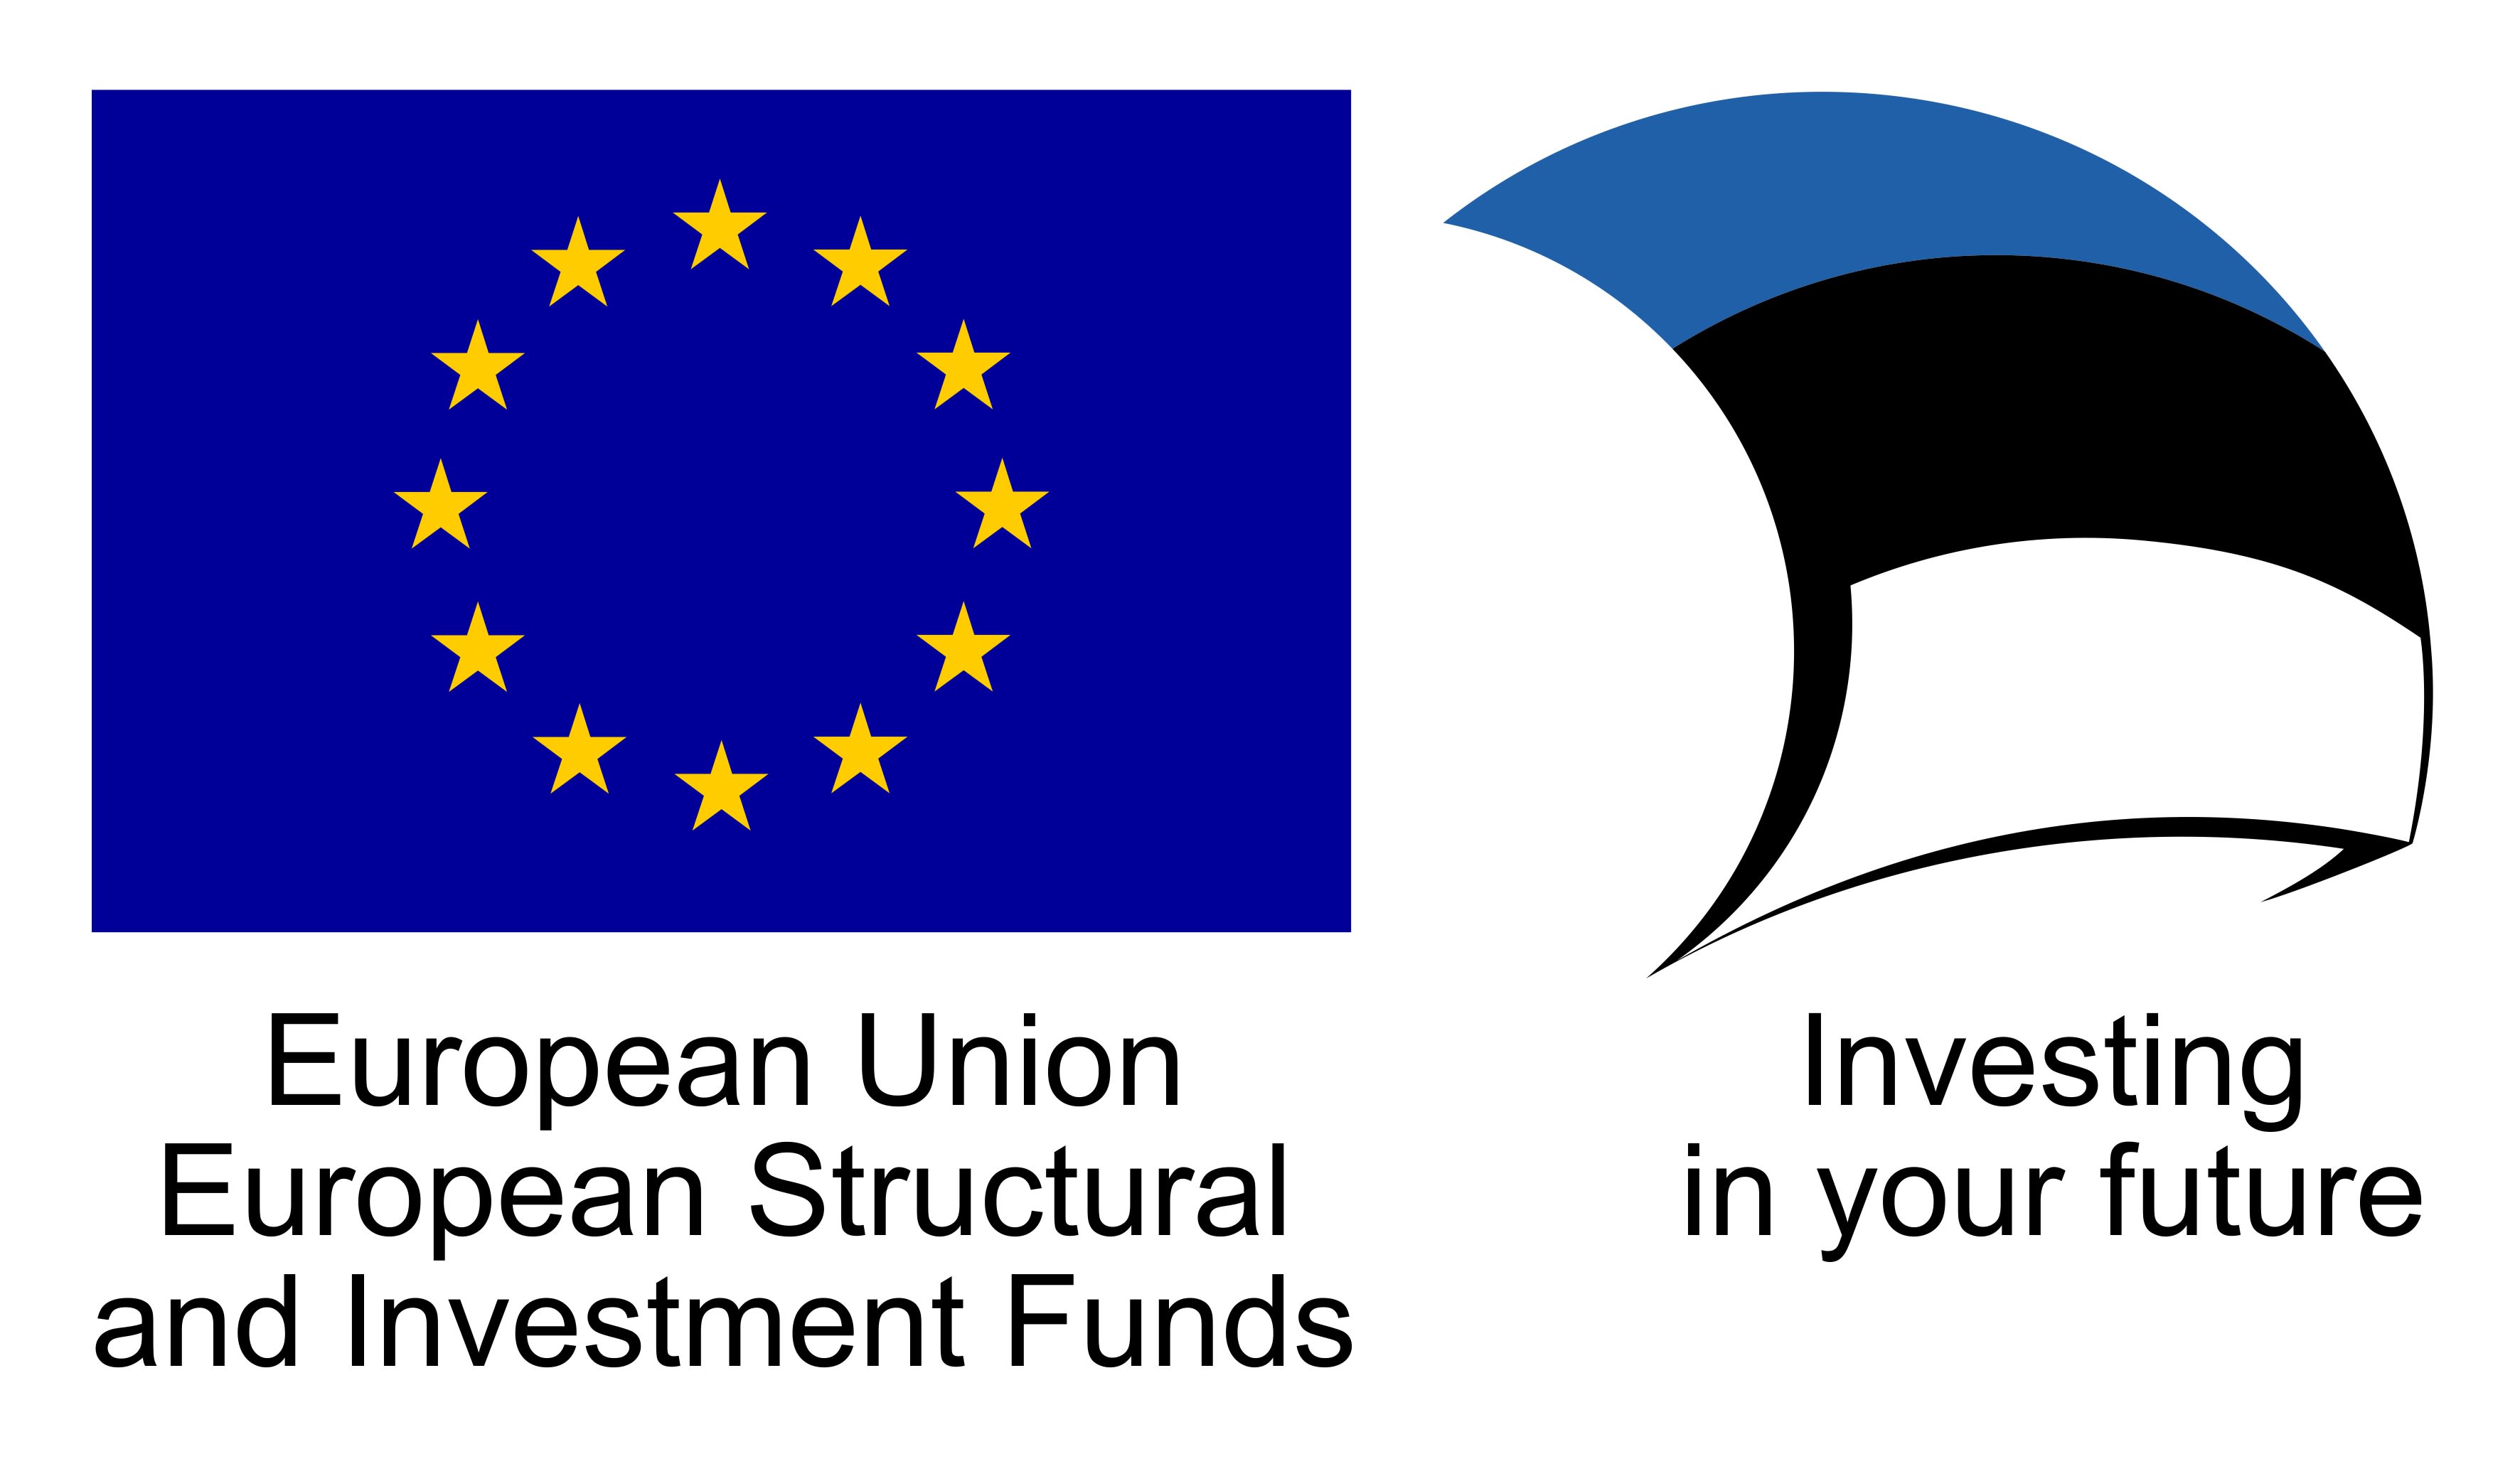 140679_eu_structural_and_investment_funds_horizontal.jpg